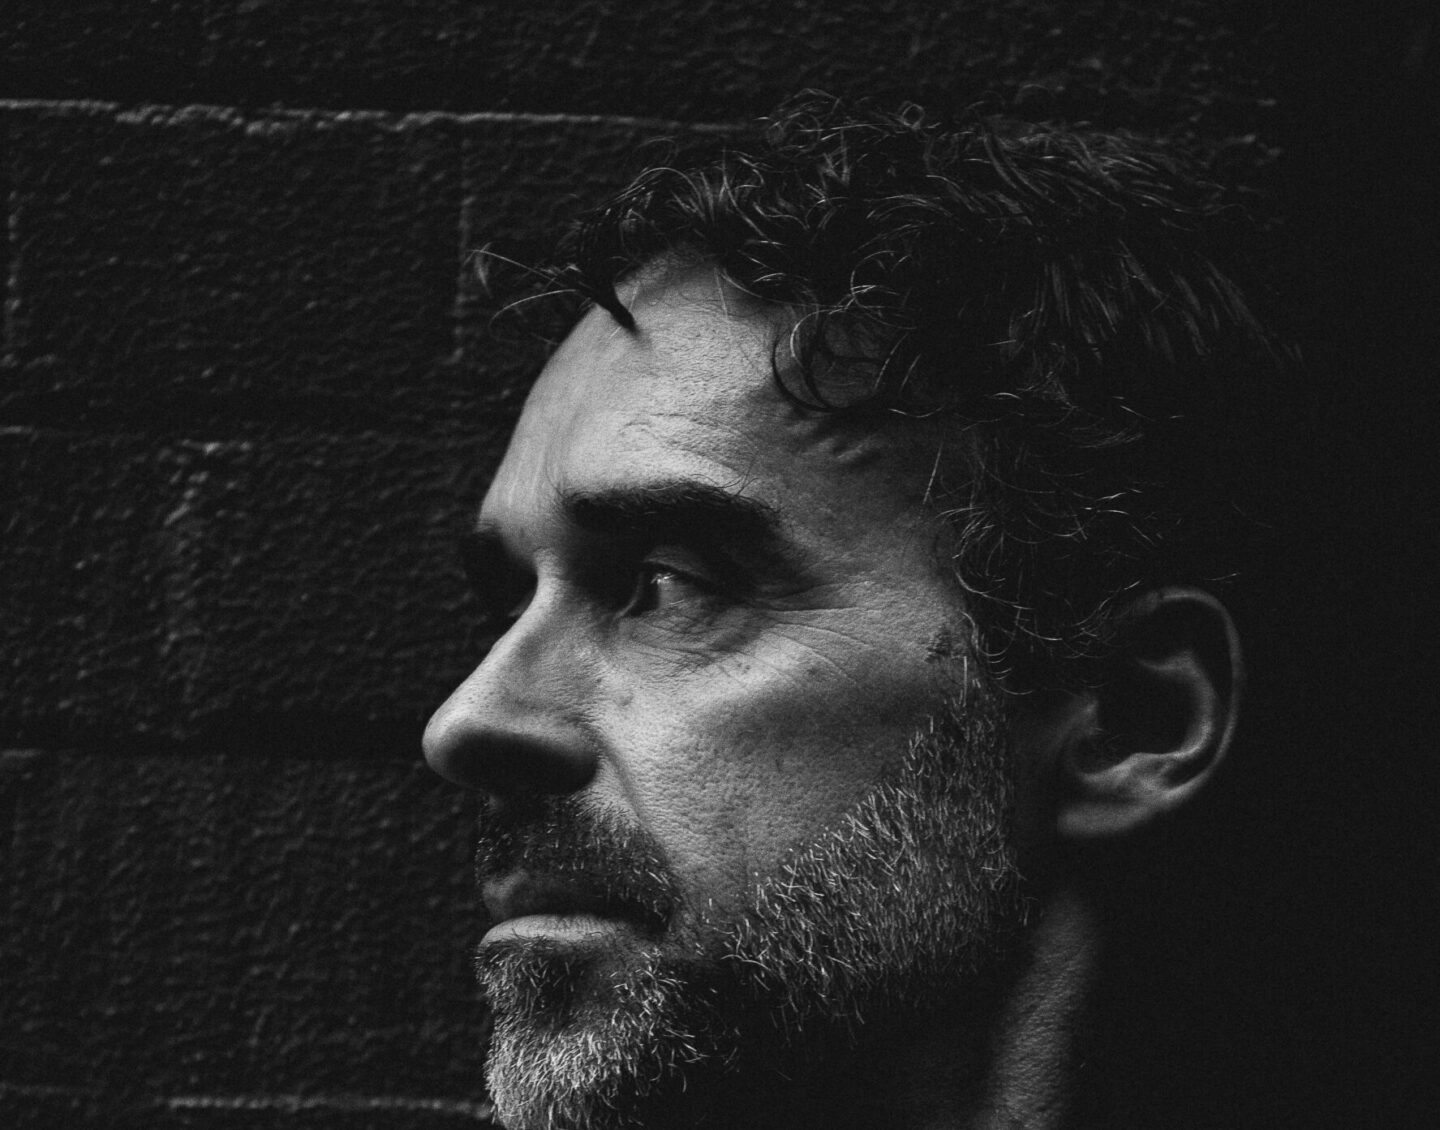 A black and white photo of a man in side profile with dark curly hair and a short beard